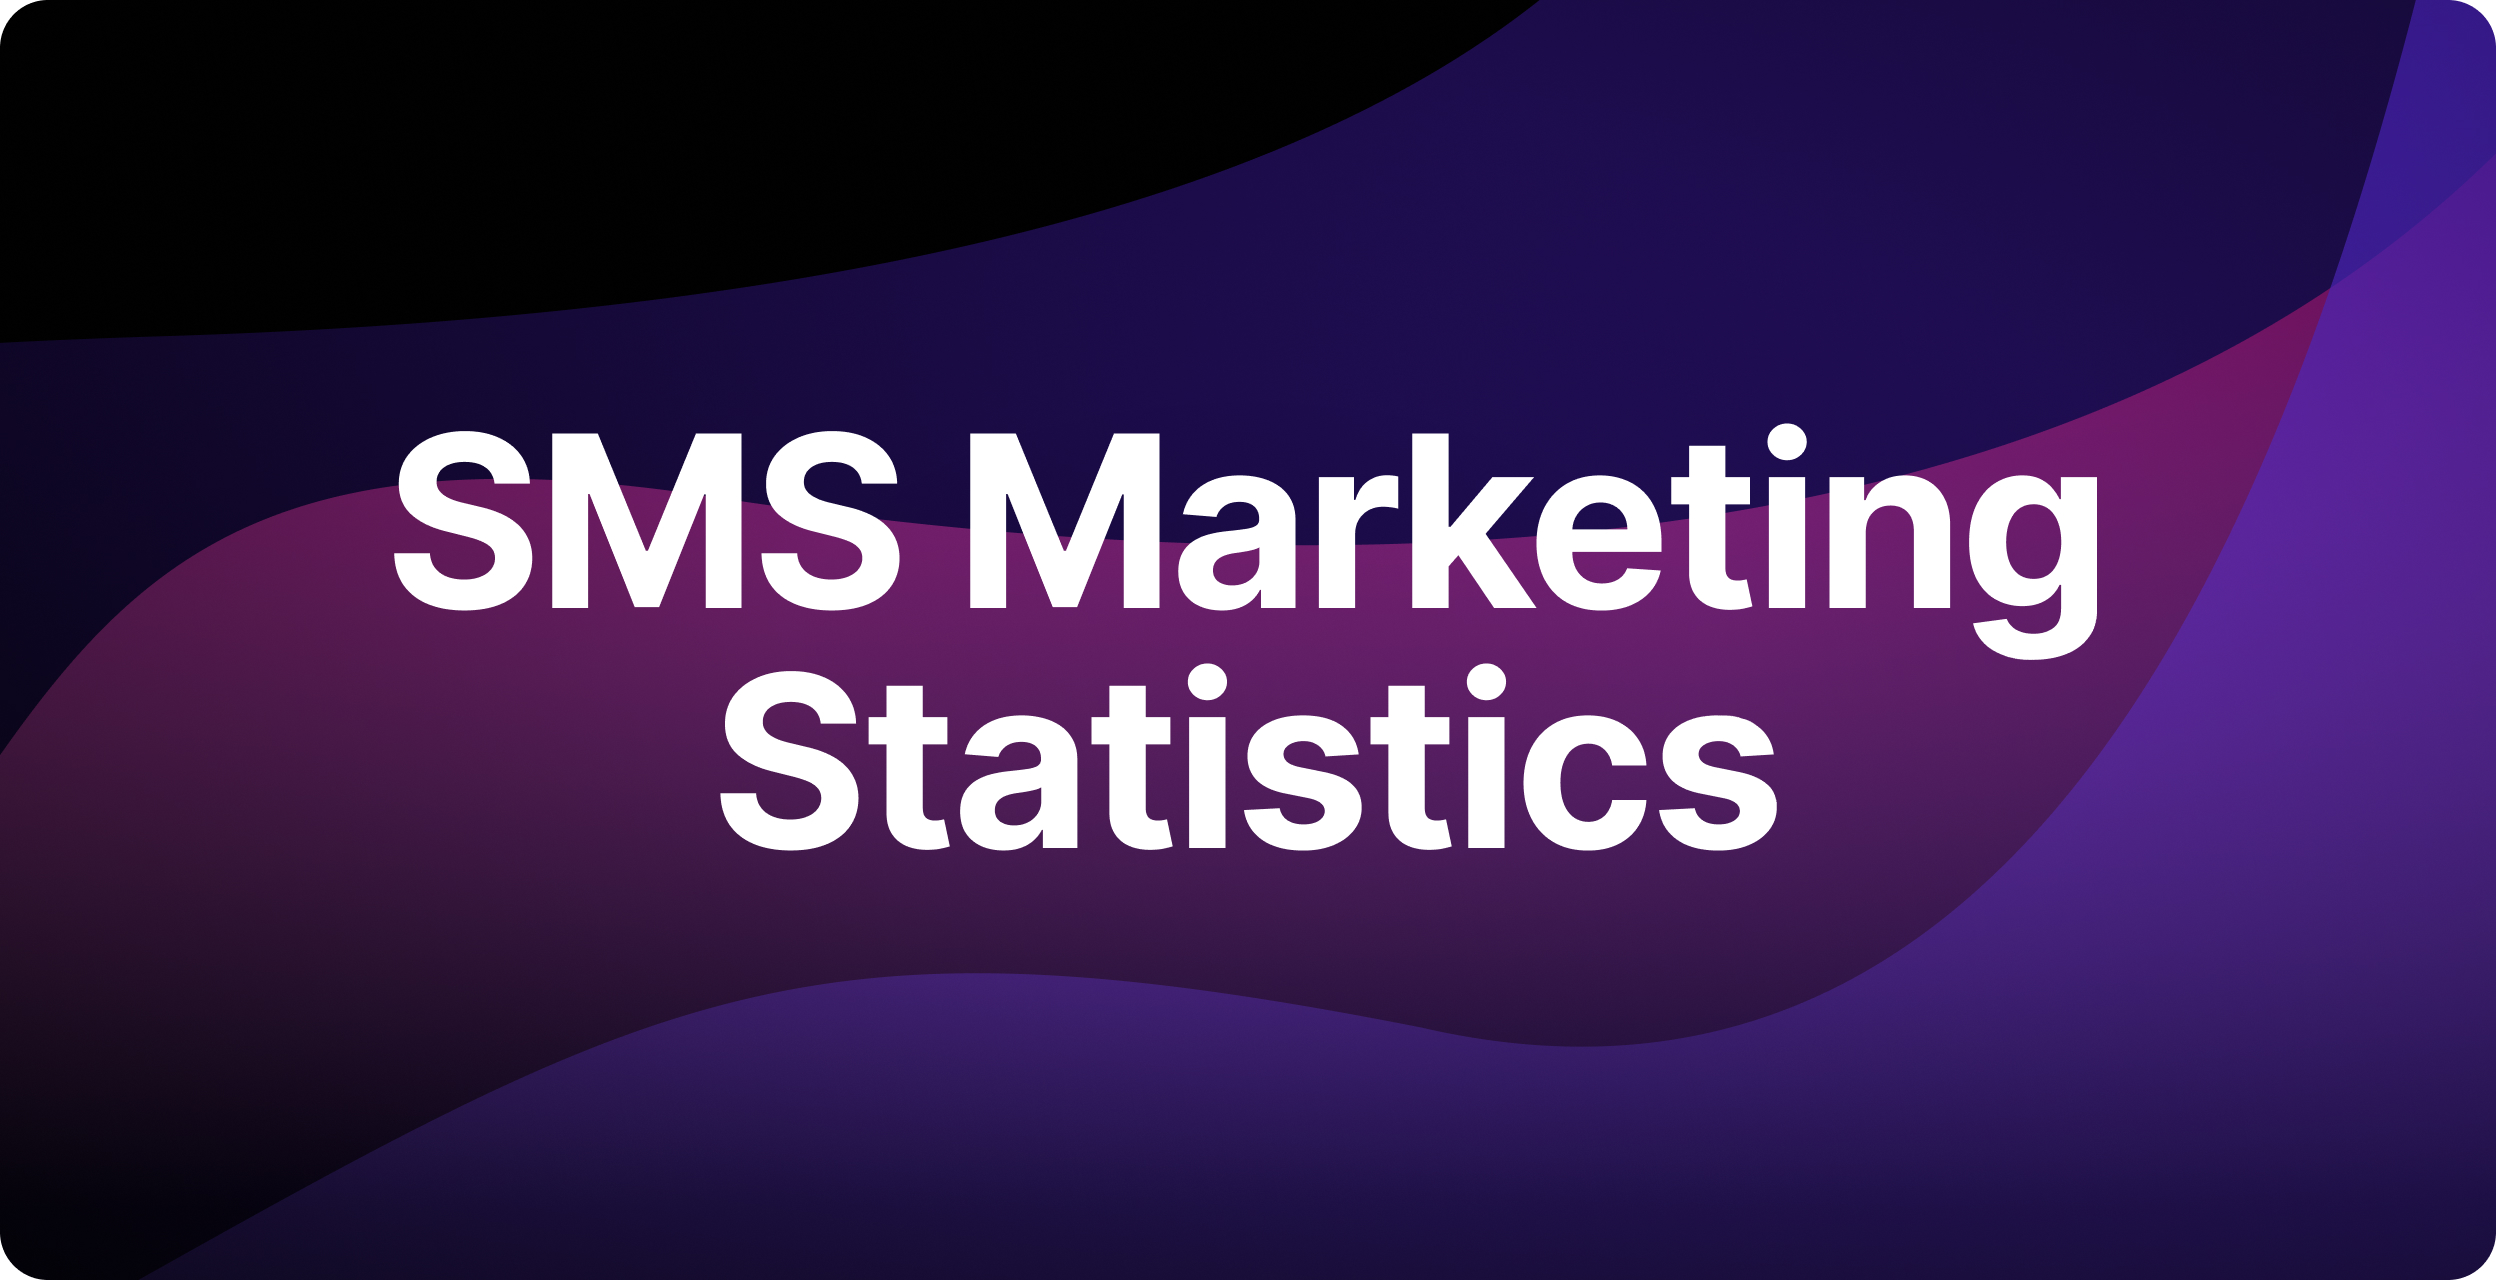 SMS Marketing Statistics - The Power of Immediate Engagement